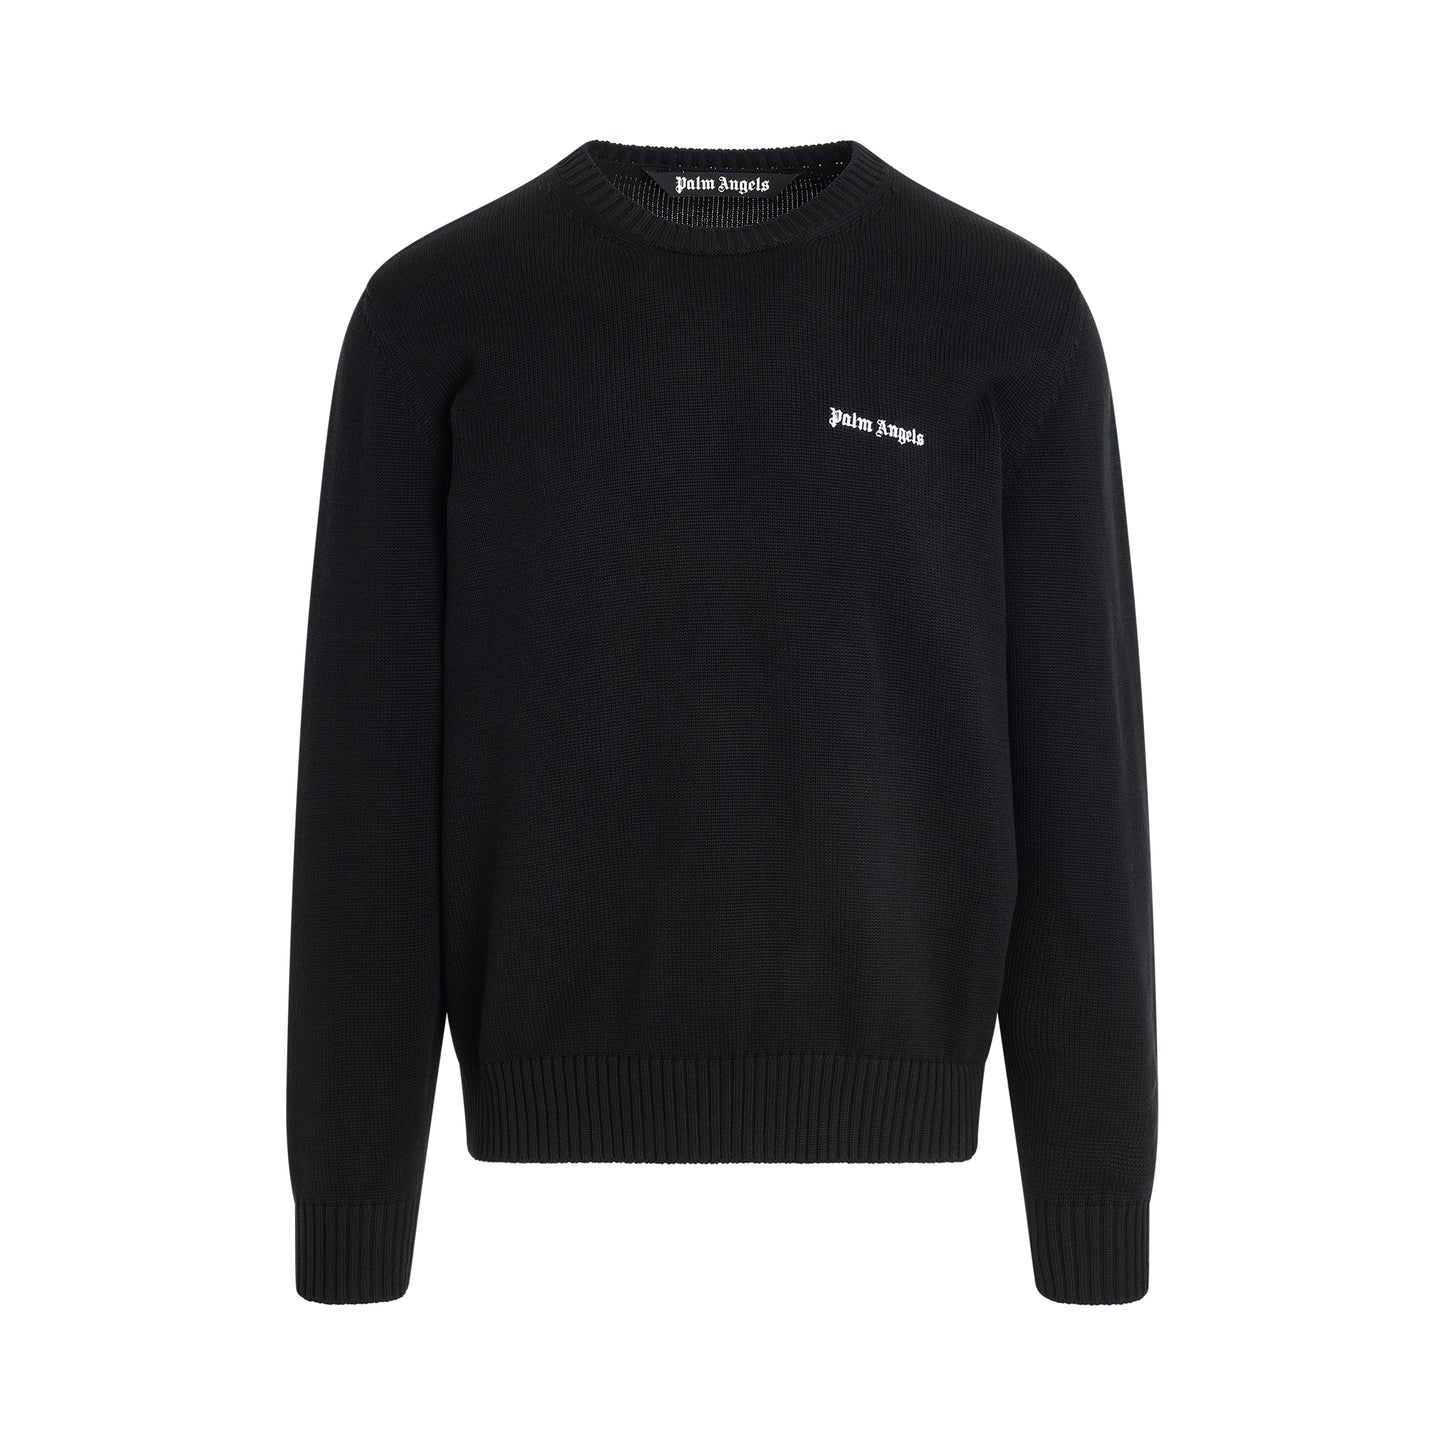 Classic Logo Round Neck Knit Sweater in Black/Off White